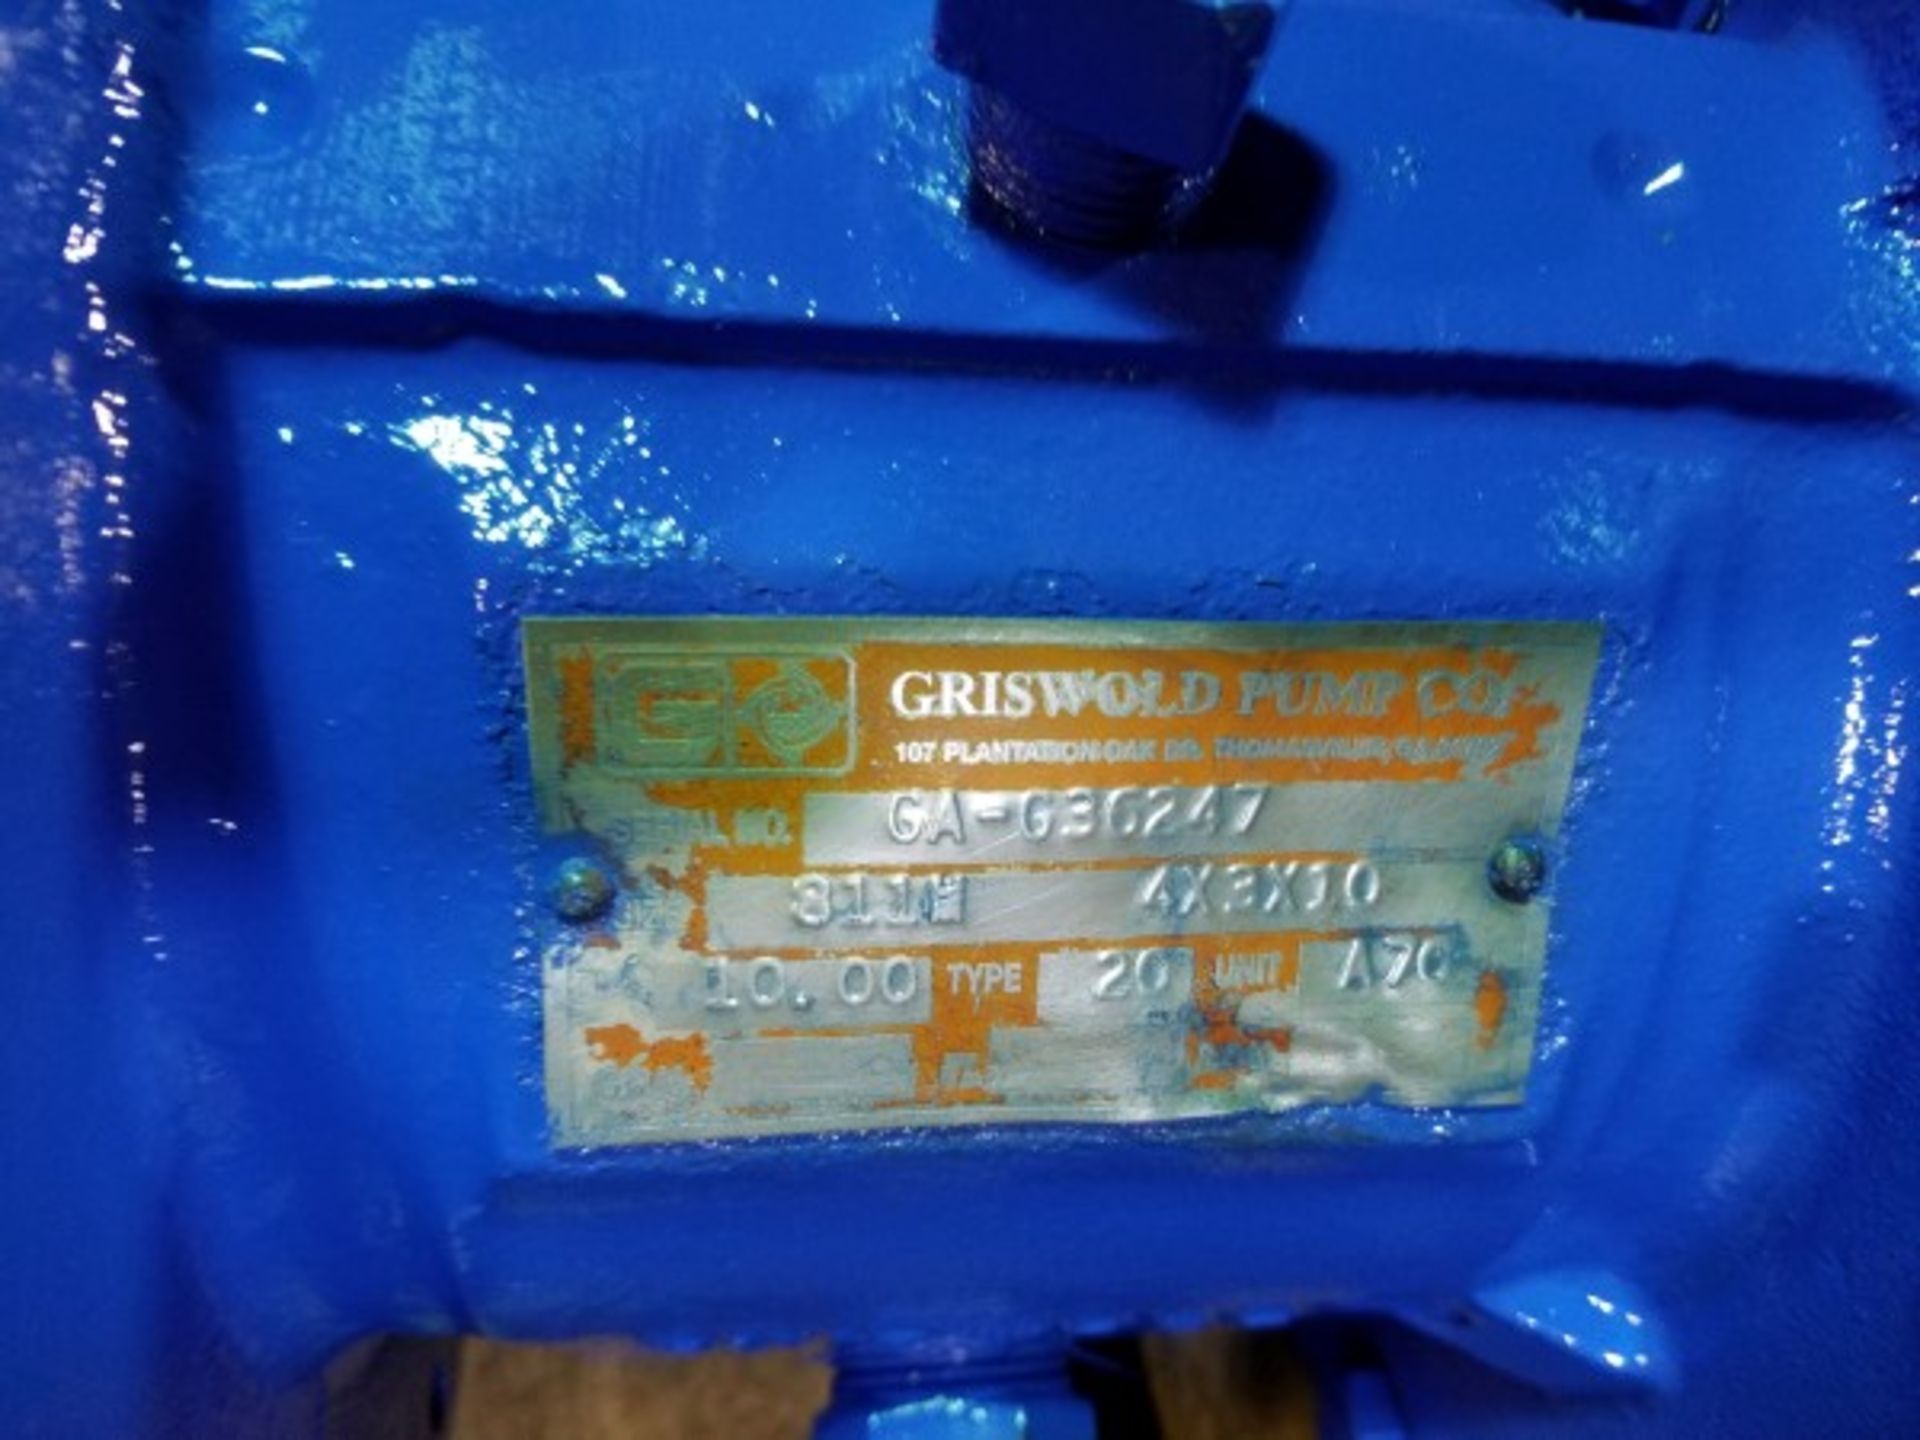 Griswold 4 x 3 x 10 Pump | Seller to load for $10 per lot or buyers may remove hand carry items by - Image 2 of 2